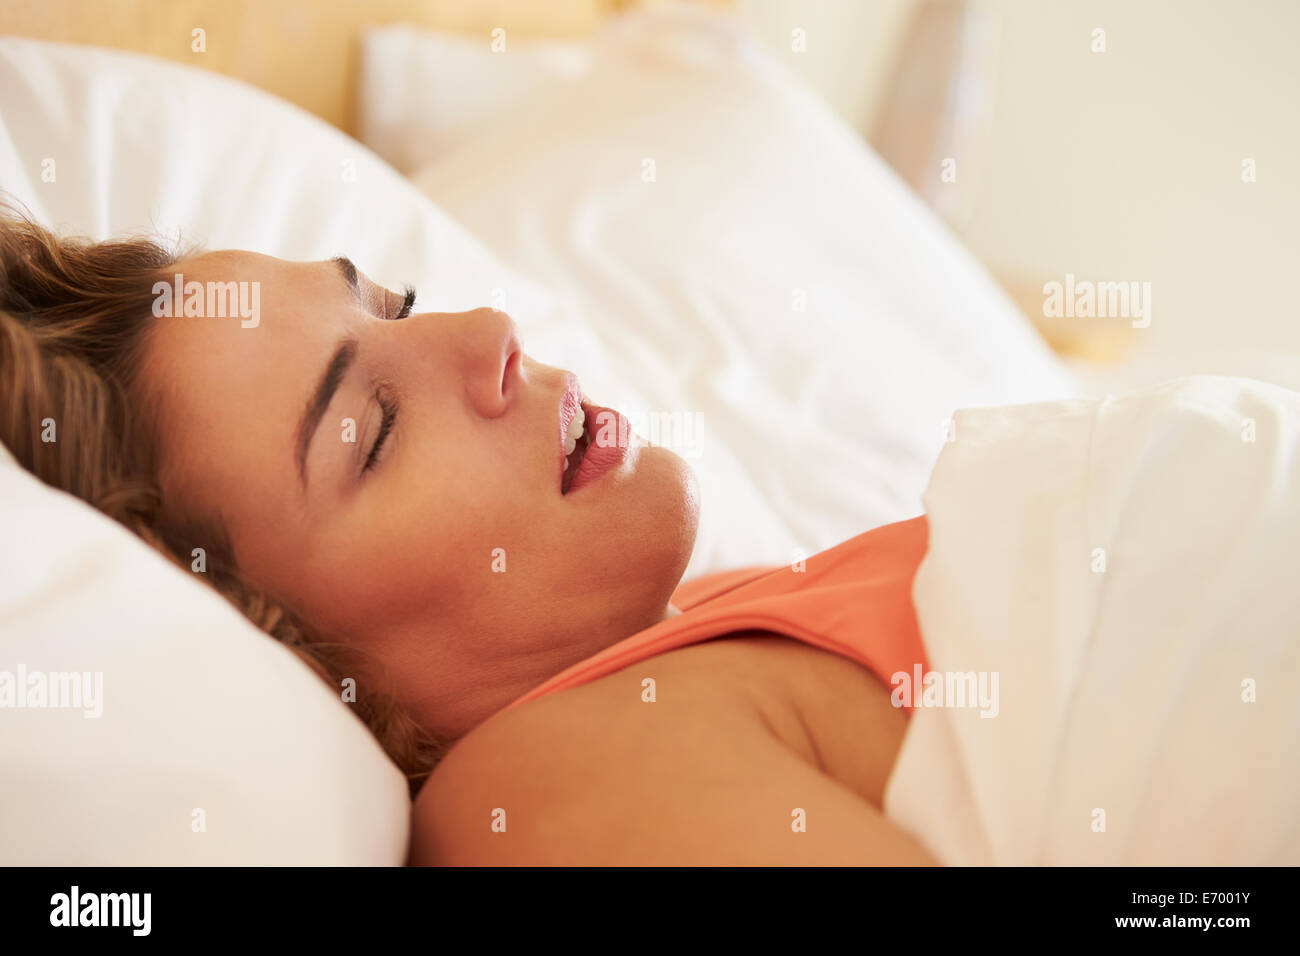 Overweight Woman Asleep In Bed Snoring Stock Photo